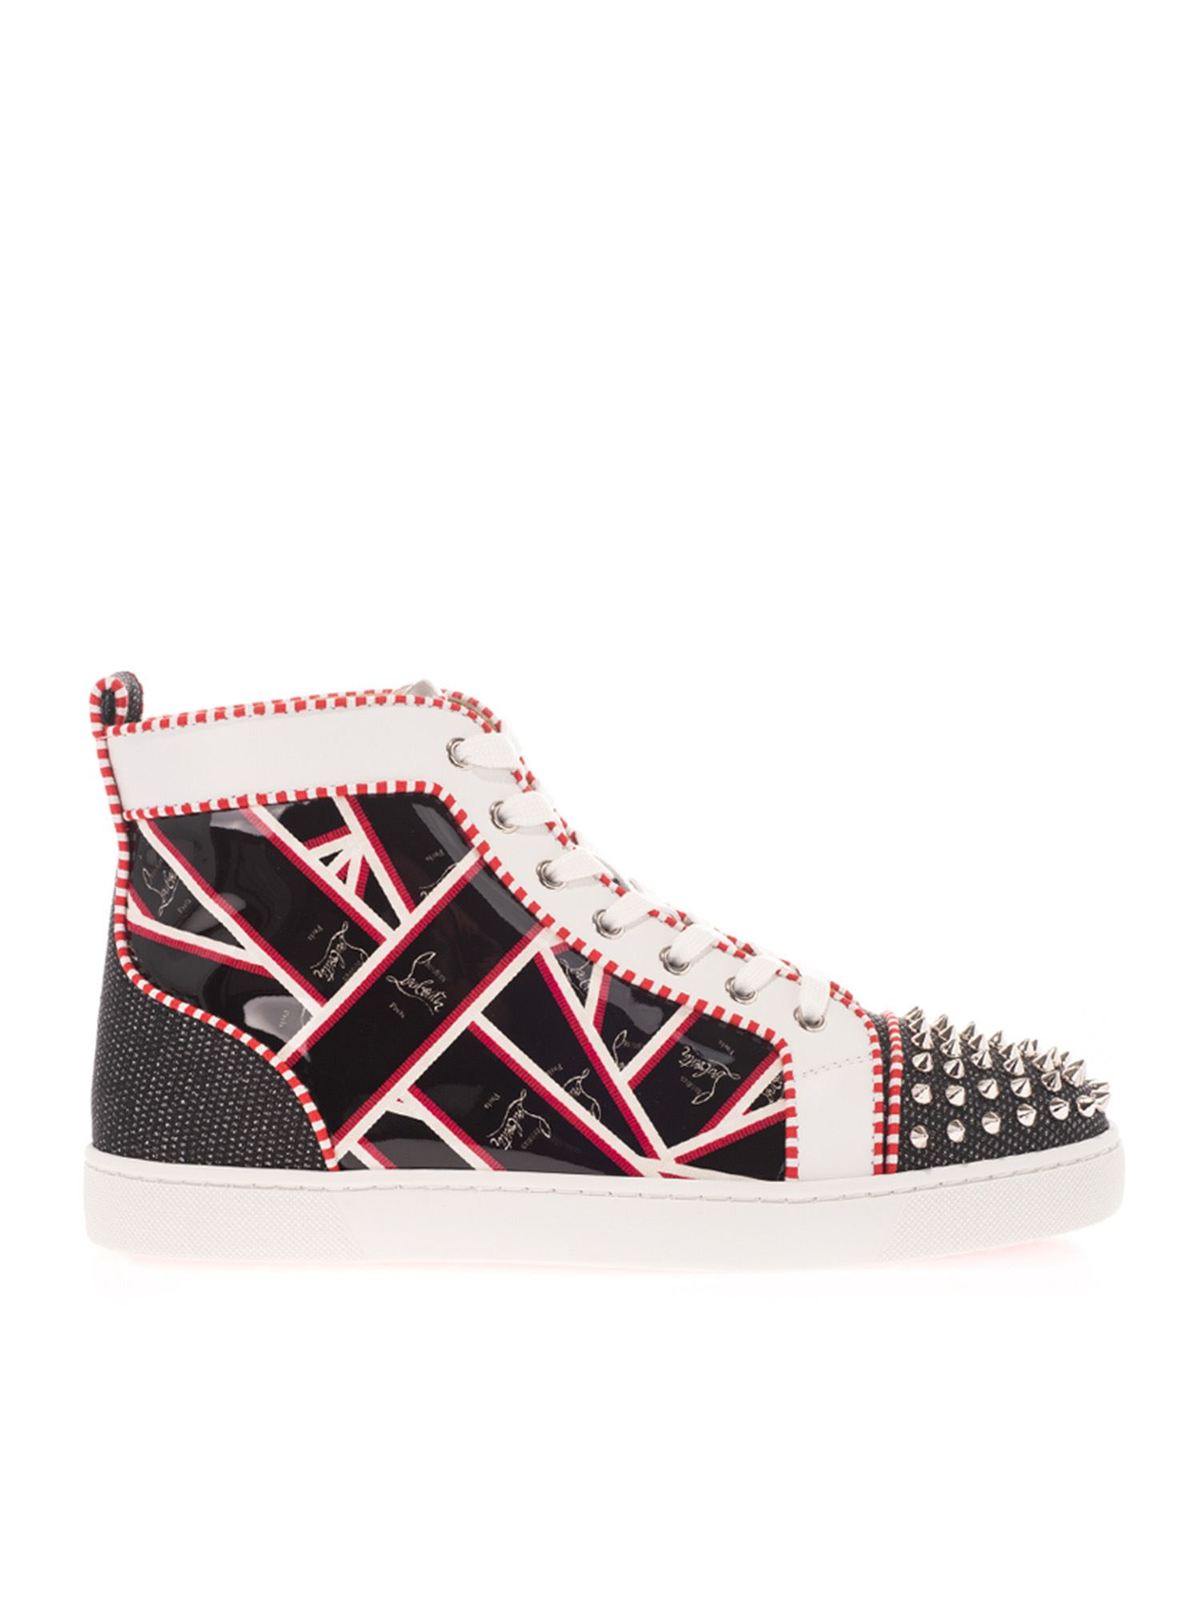 Christian Louboutin 'louis Spikes' Sneakers in Black